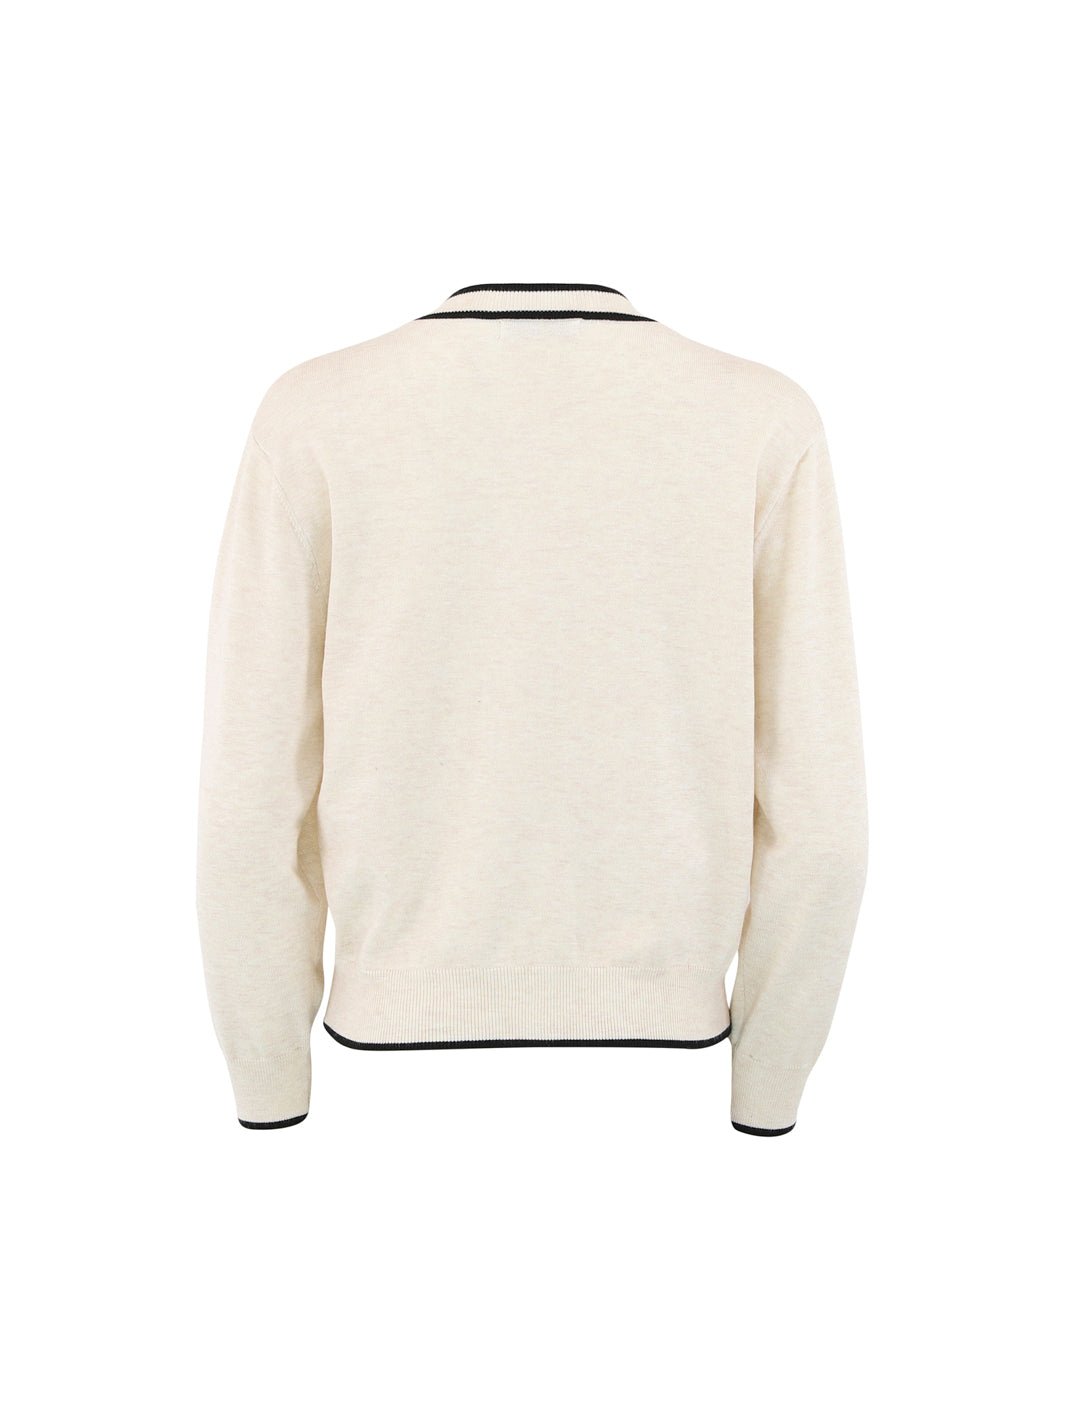 Continue Janni cardigan off white - Online-Mode